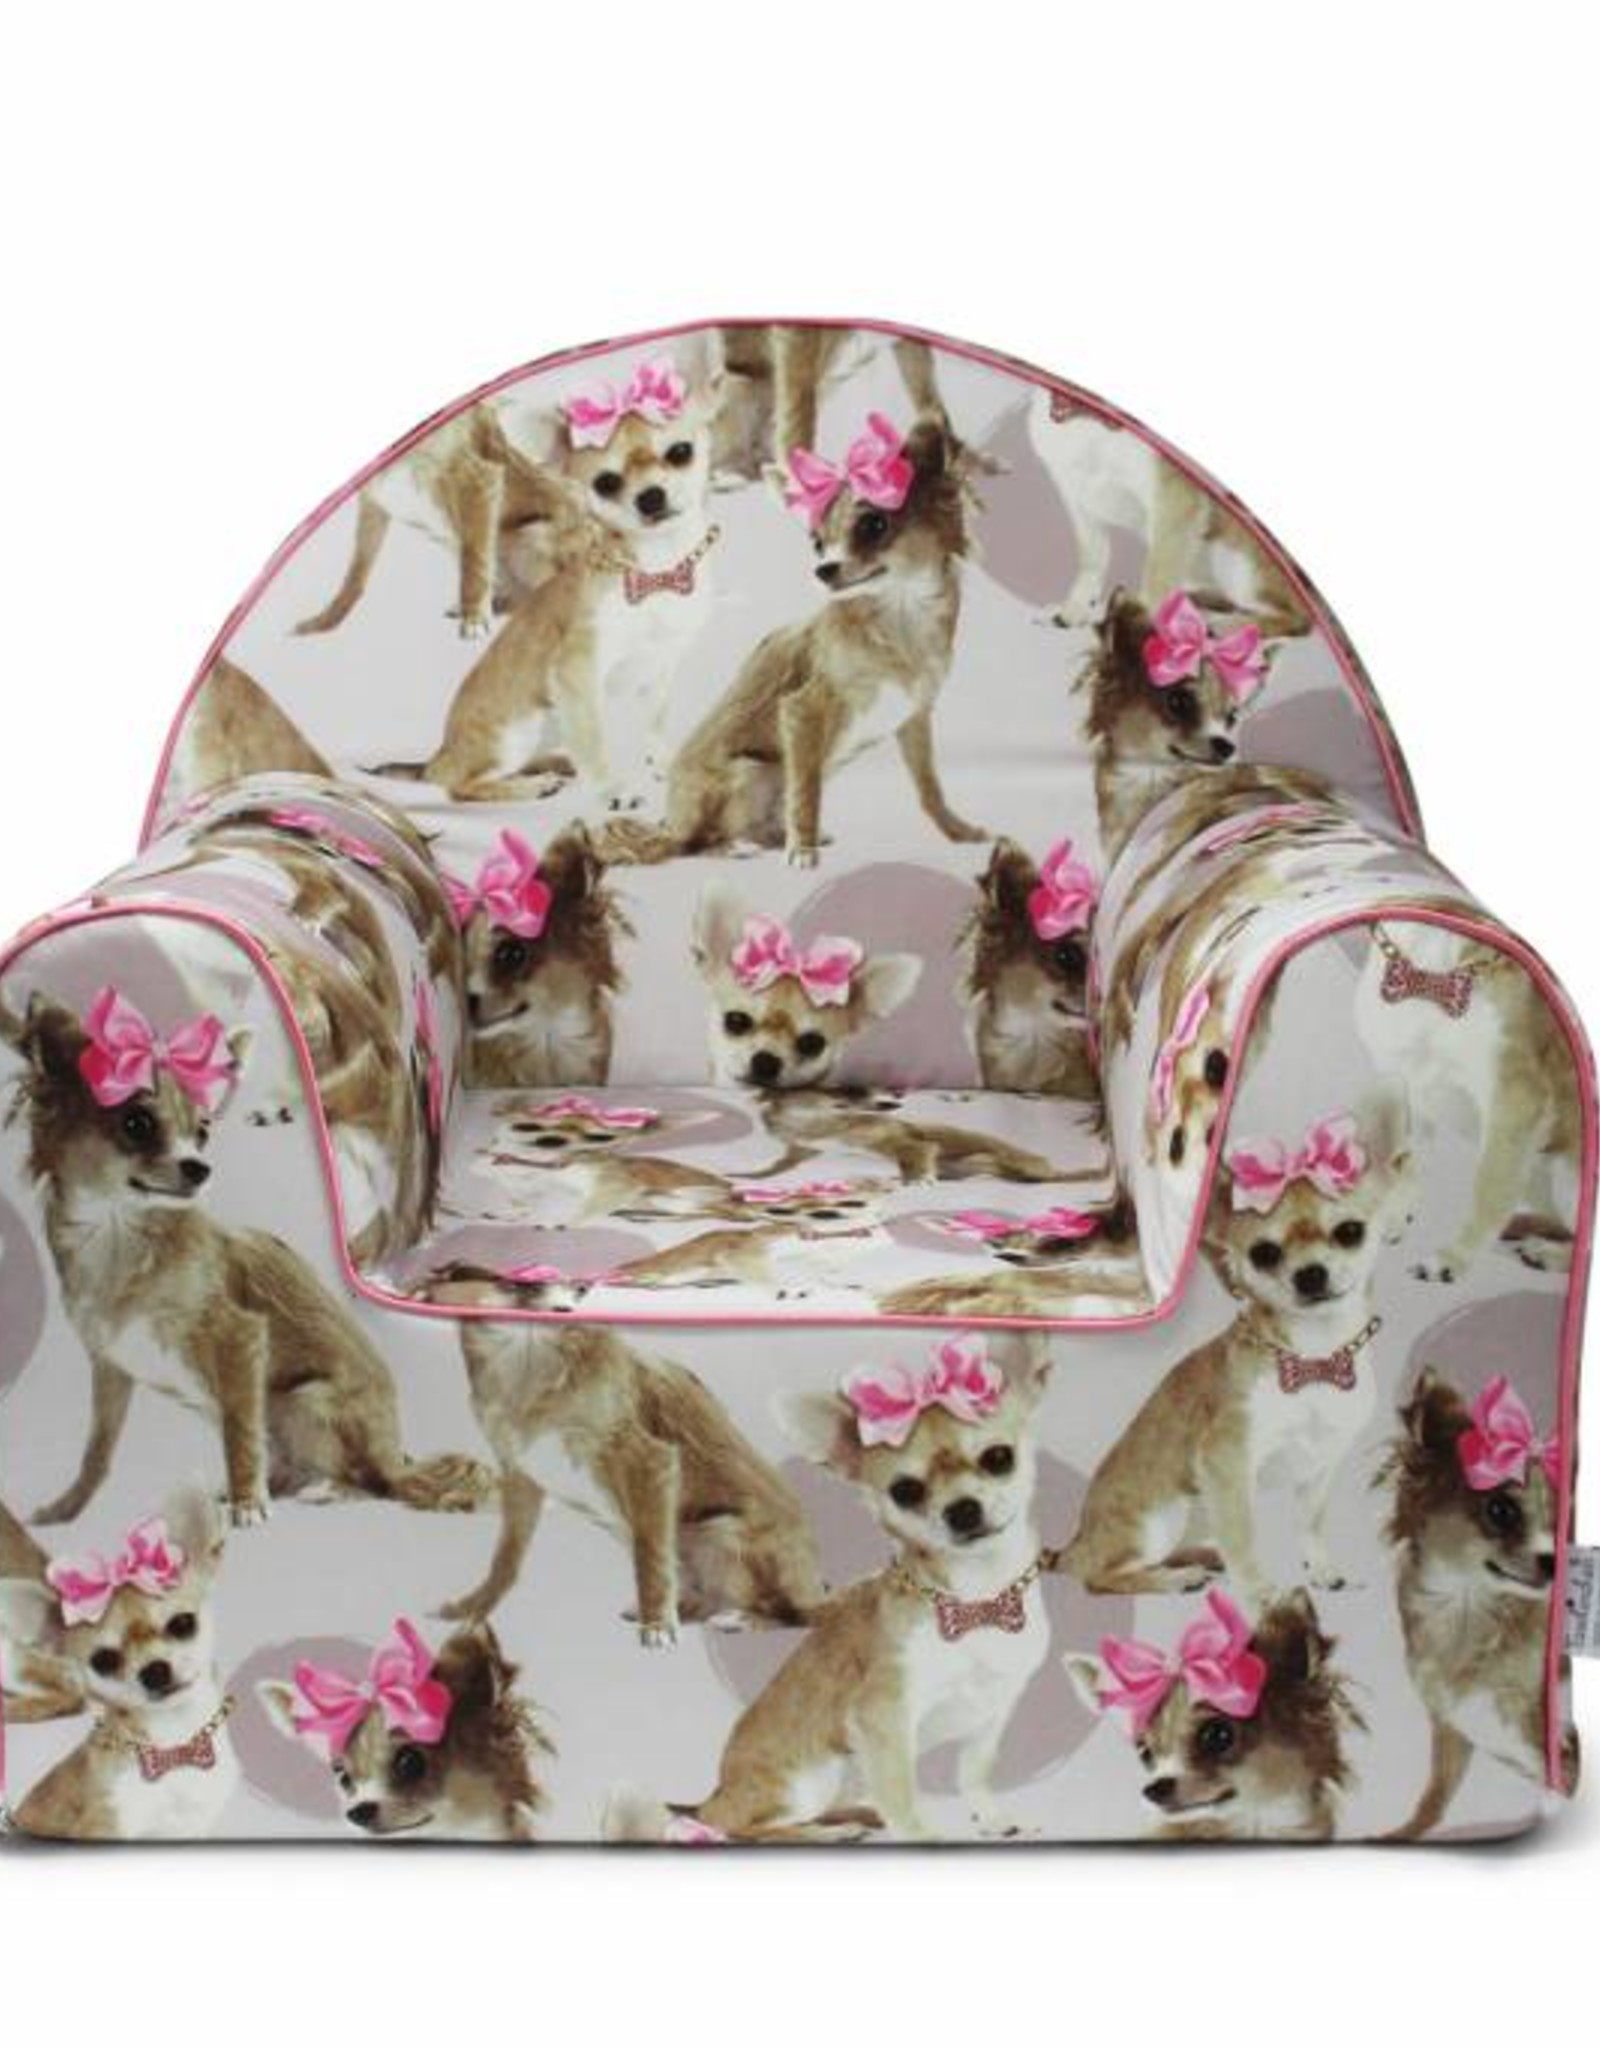 Little Chic by TAVO Little Chic by TAVO Hundesessel PinkyBell Chihuahua Sessel Hundebett